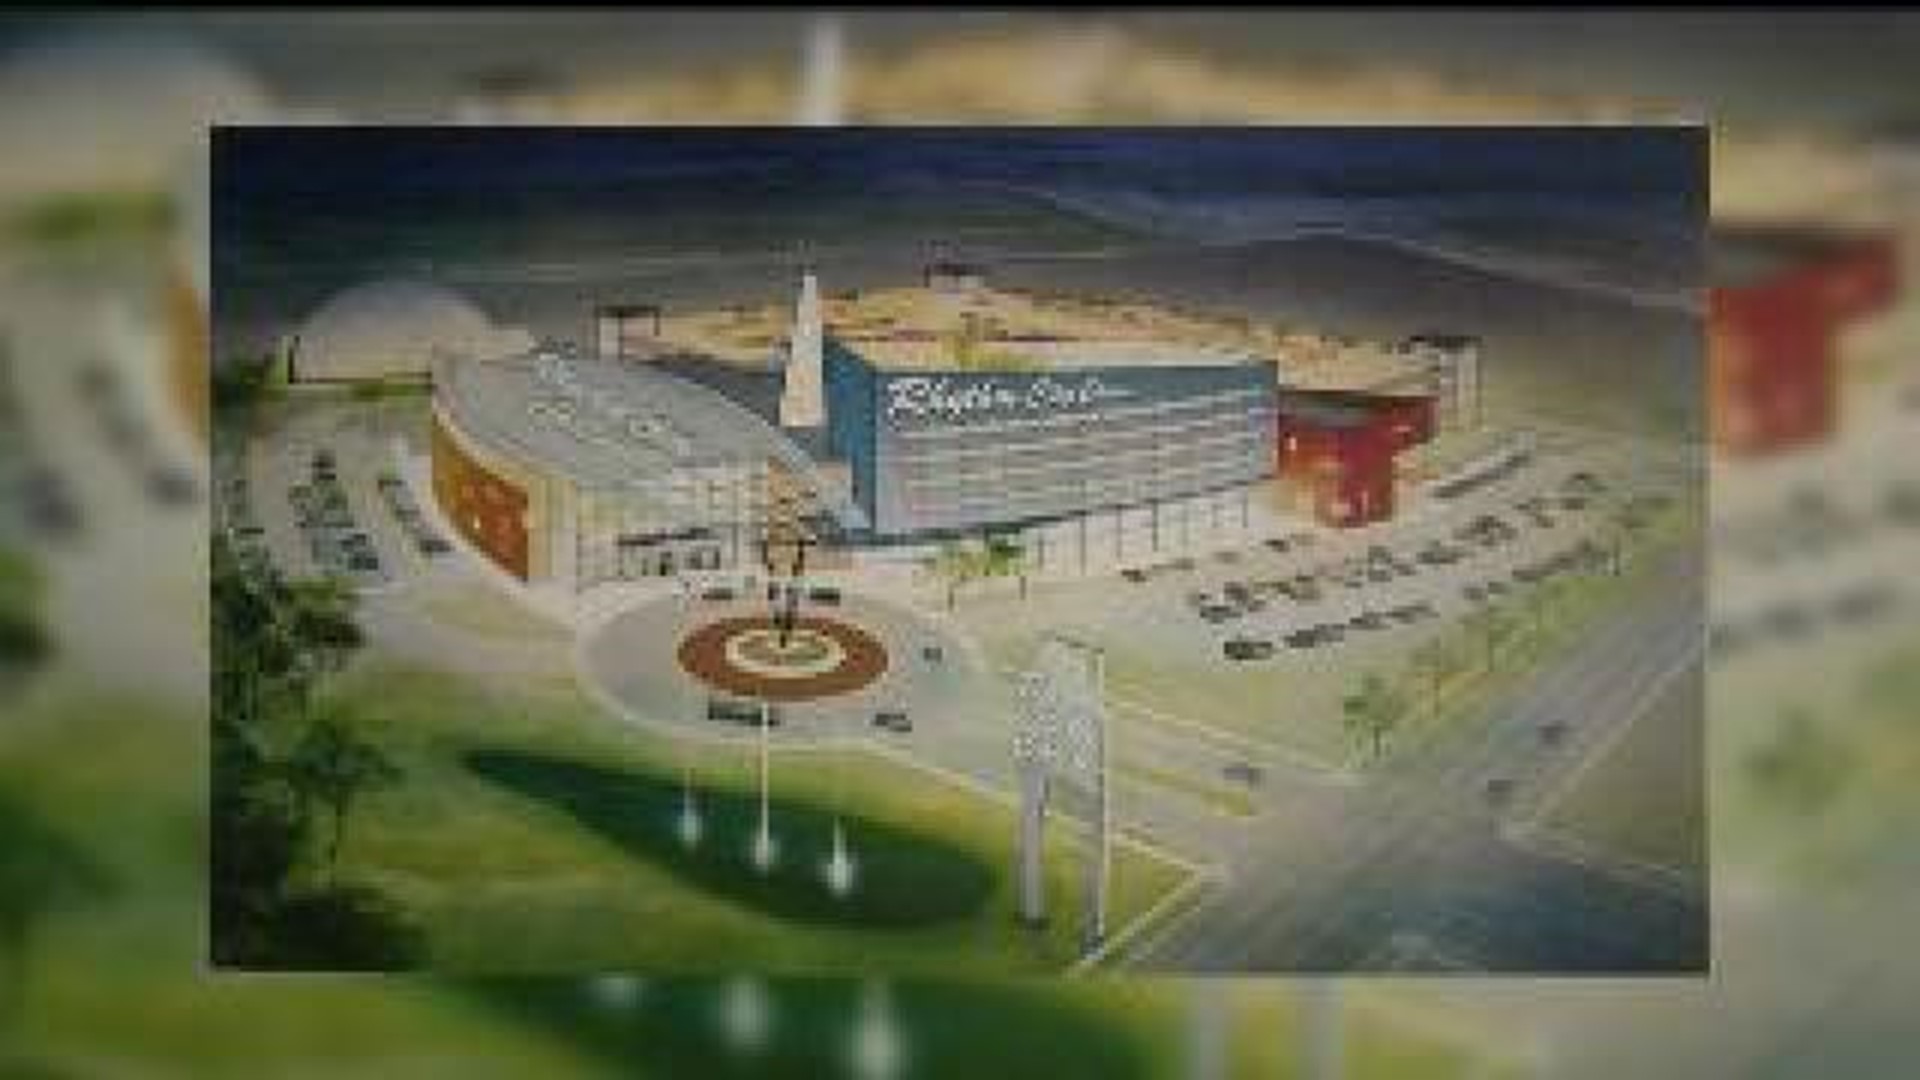 Developer comes forward with new proposal for Rhythm City Casino